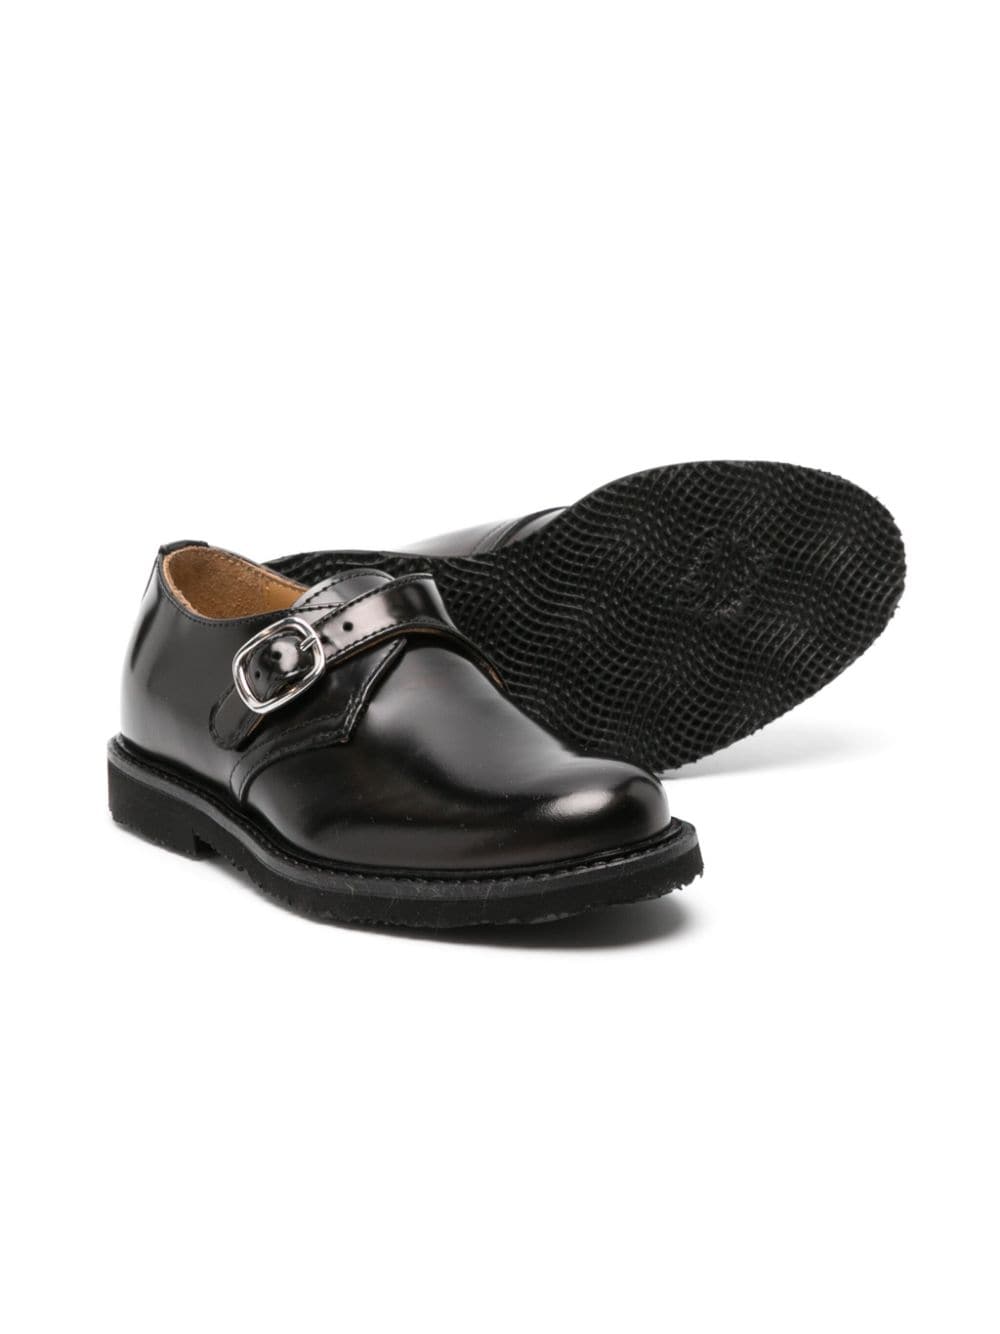 Gallucci Kids buckled leather shoes - Zwart